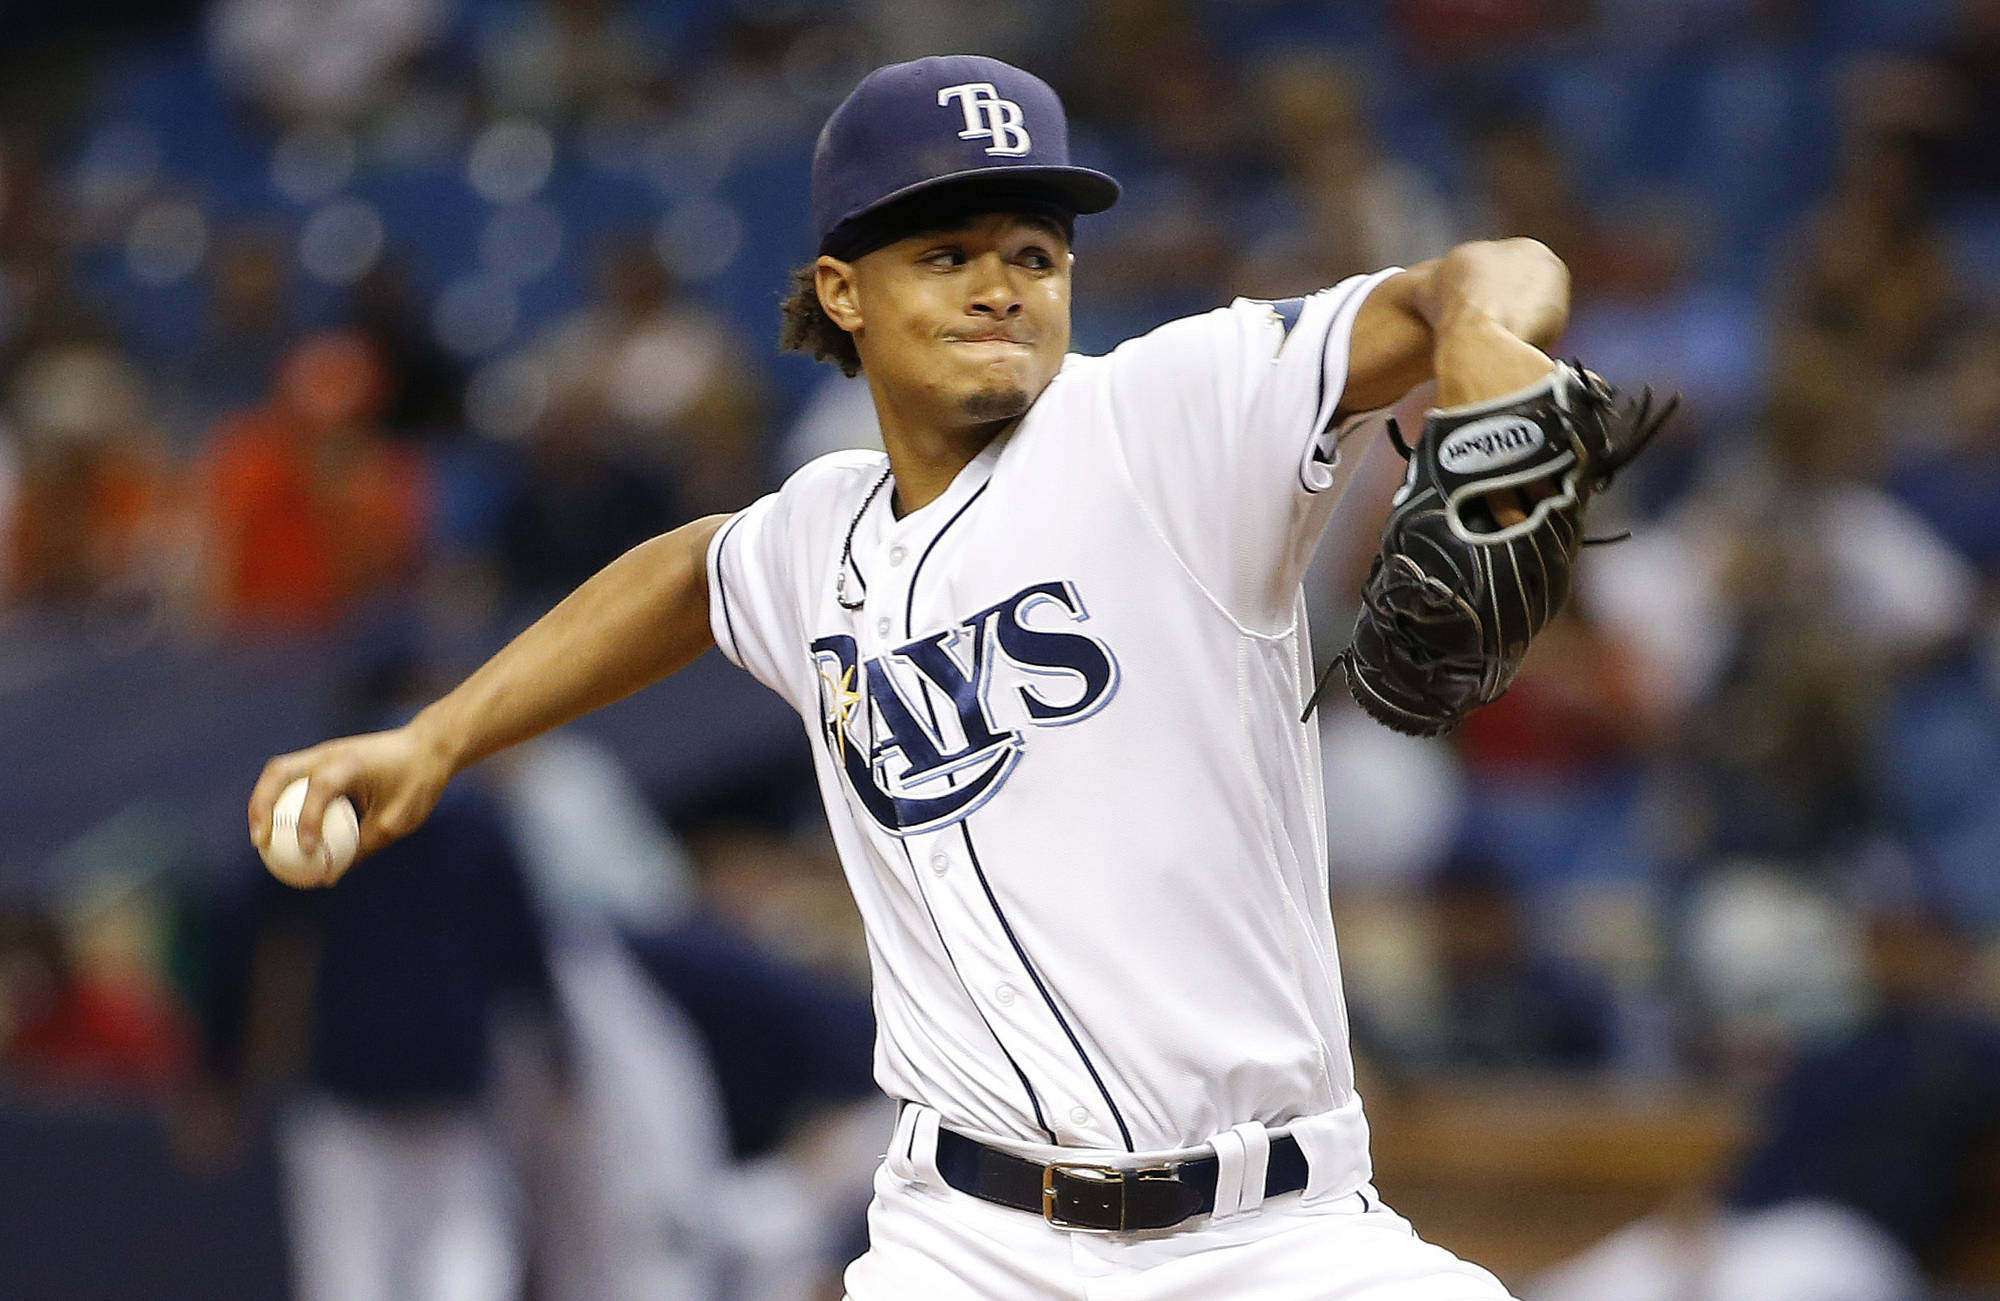 Will the Rays trade Chris Archer?